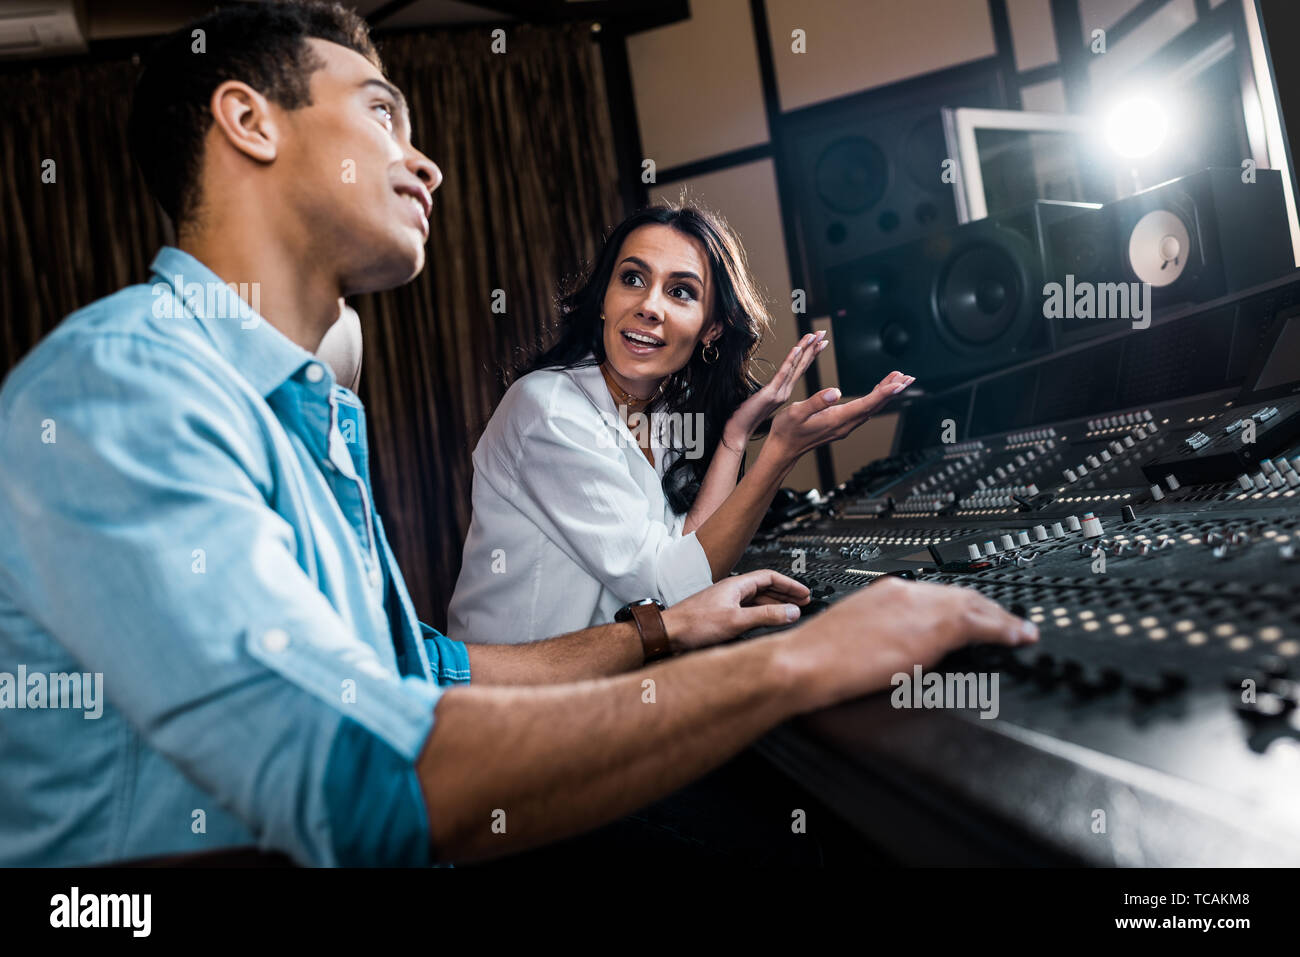 selective focus of pretty sound producer gesturing near mixed raced colleague working at mixing console Stock Photo